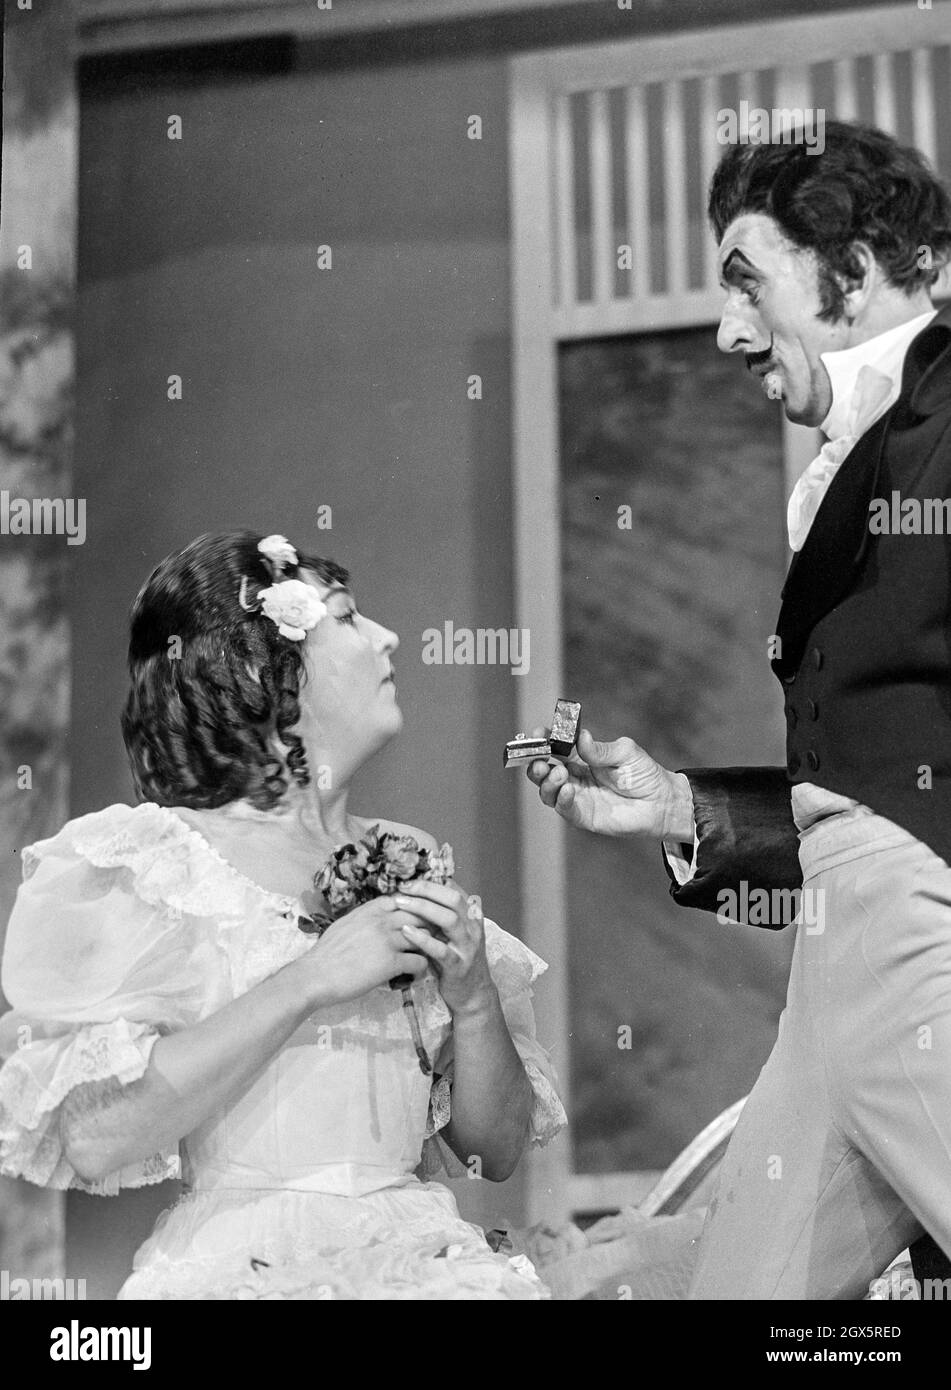 Birgitta andersson and martin Ljung acting on stage in stockholm. 1950s photo: Bo Arrhed Stock Photo